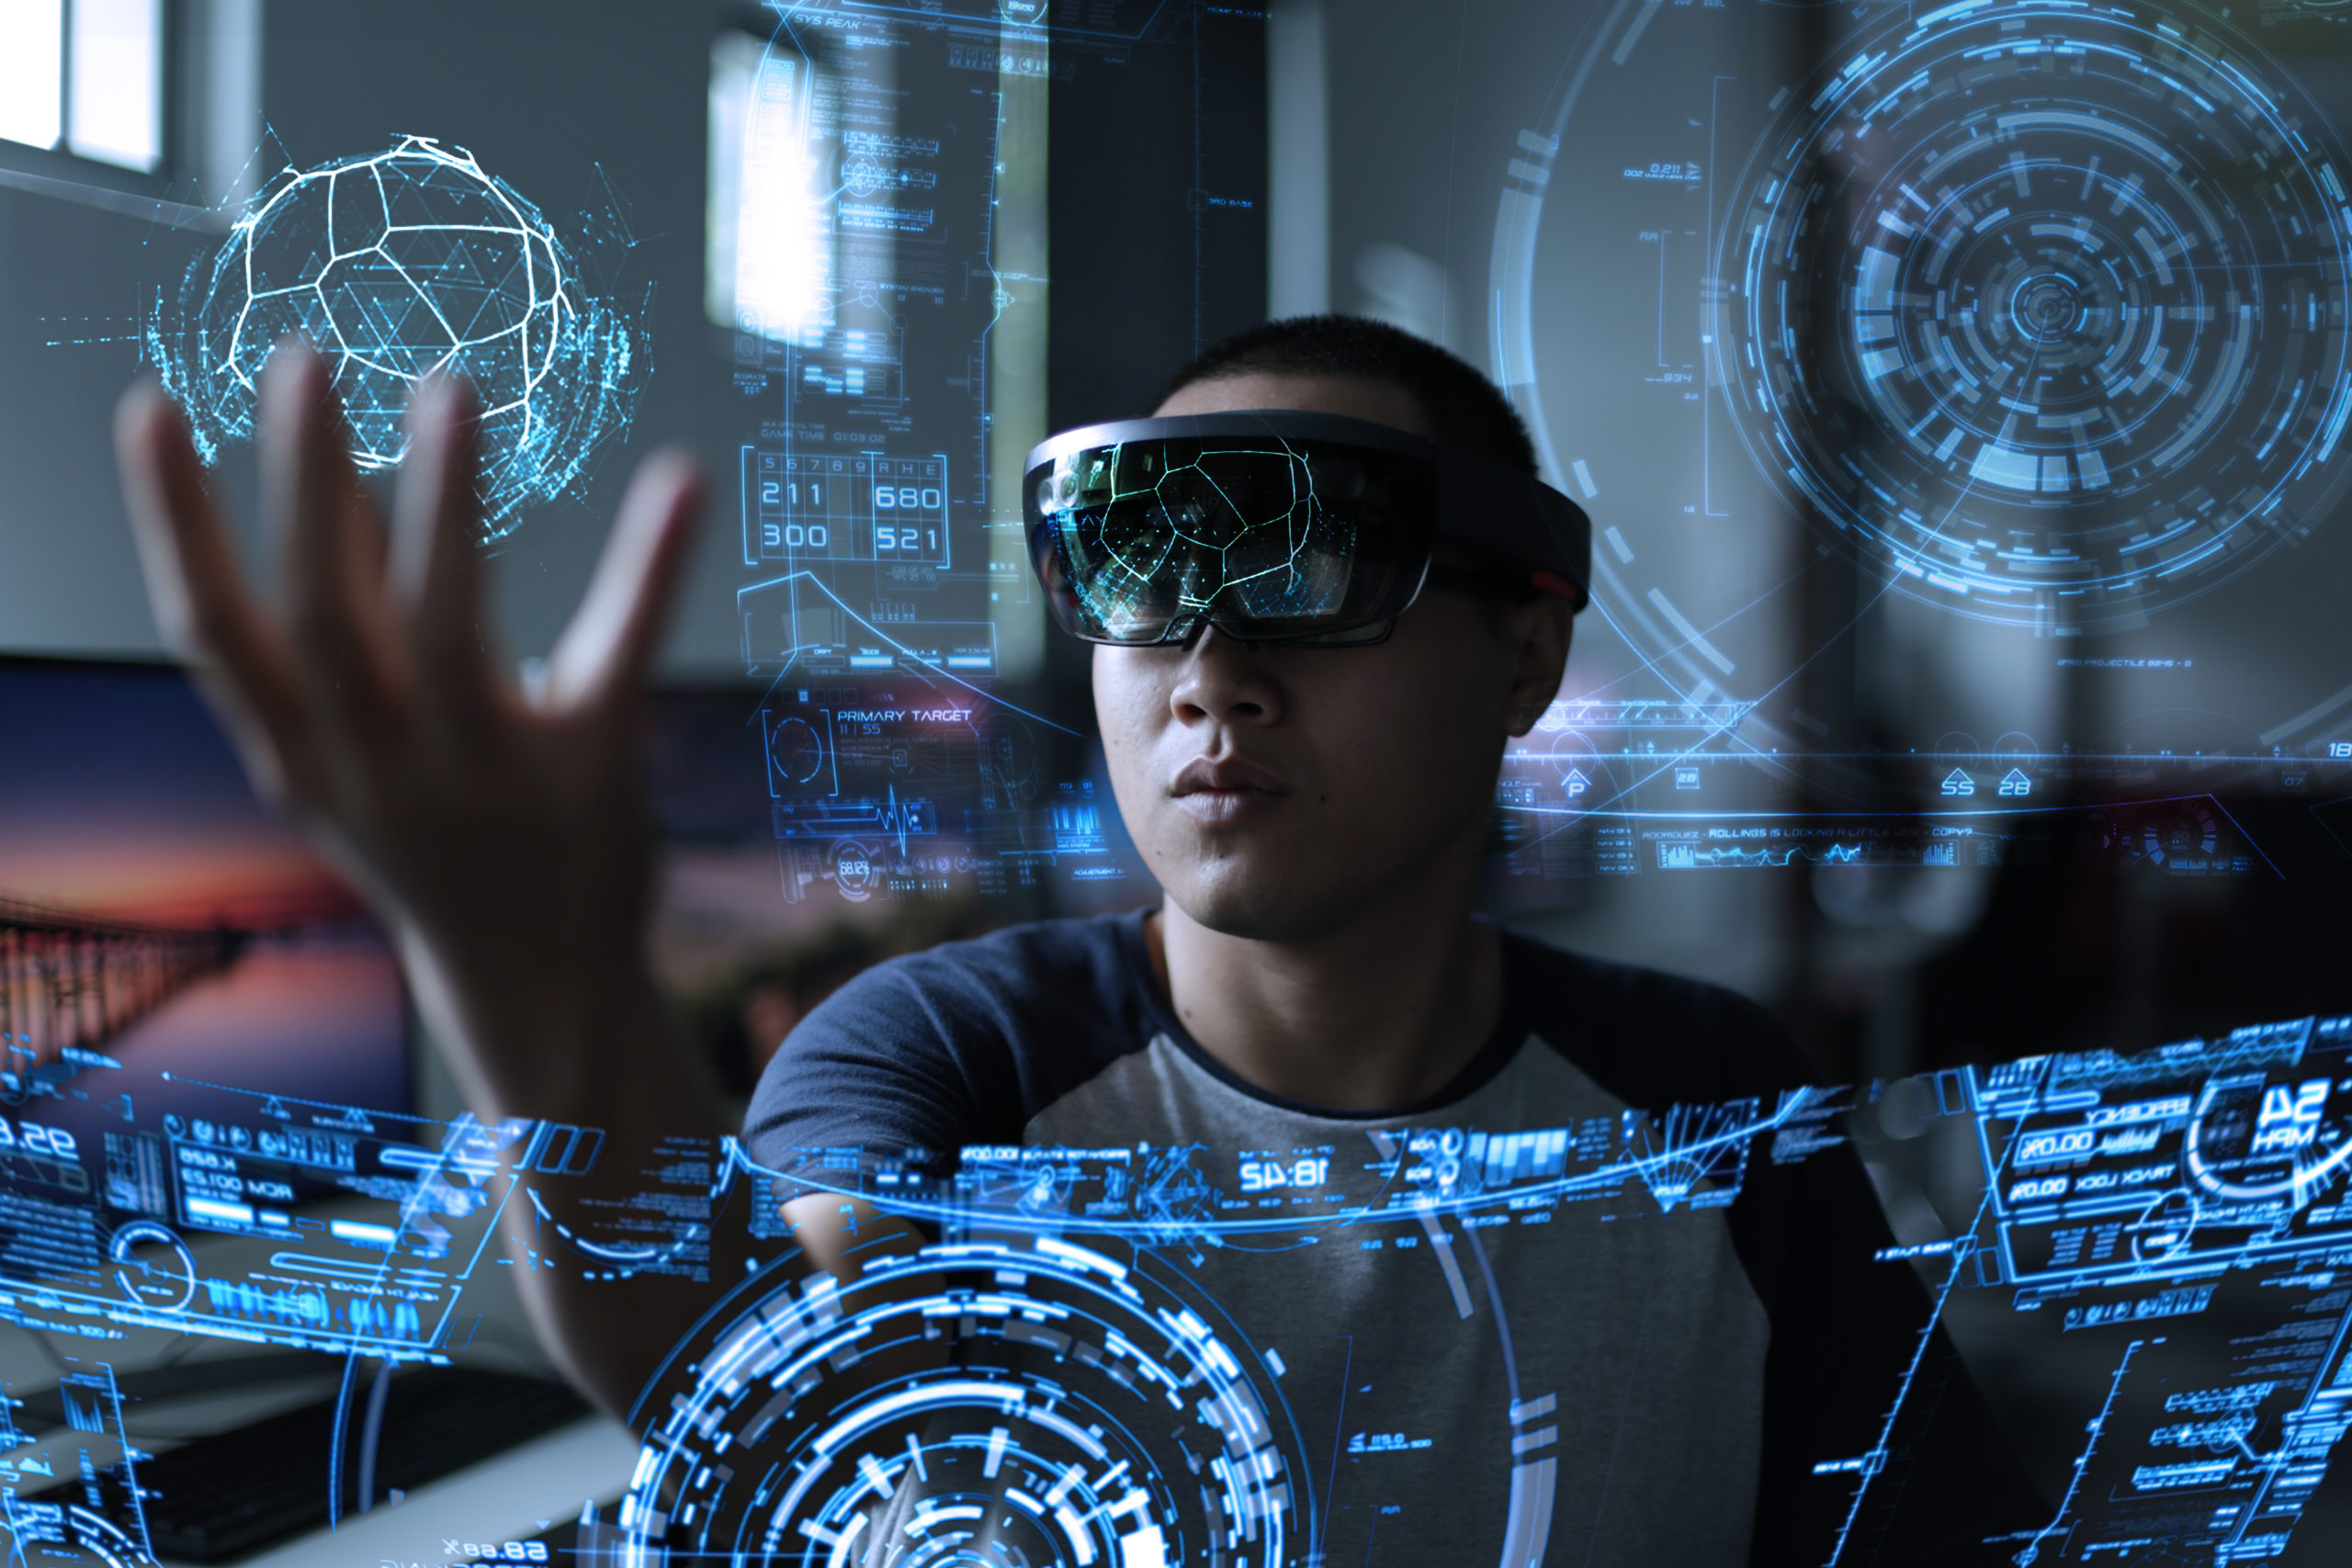 prieel vals vervagen 2020: The Year of AR and VR for Education and Training - EON Reality